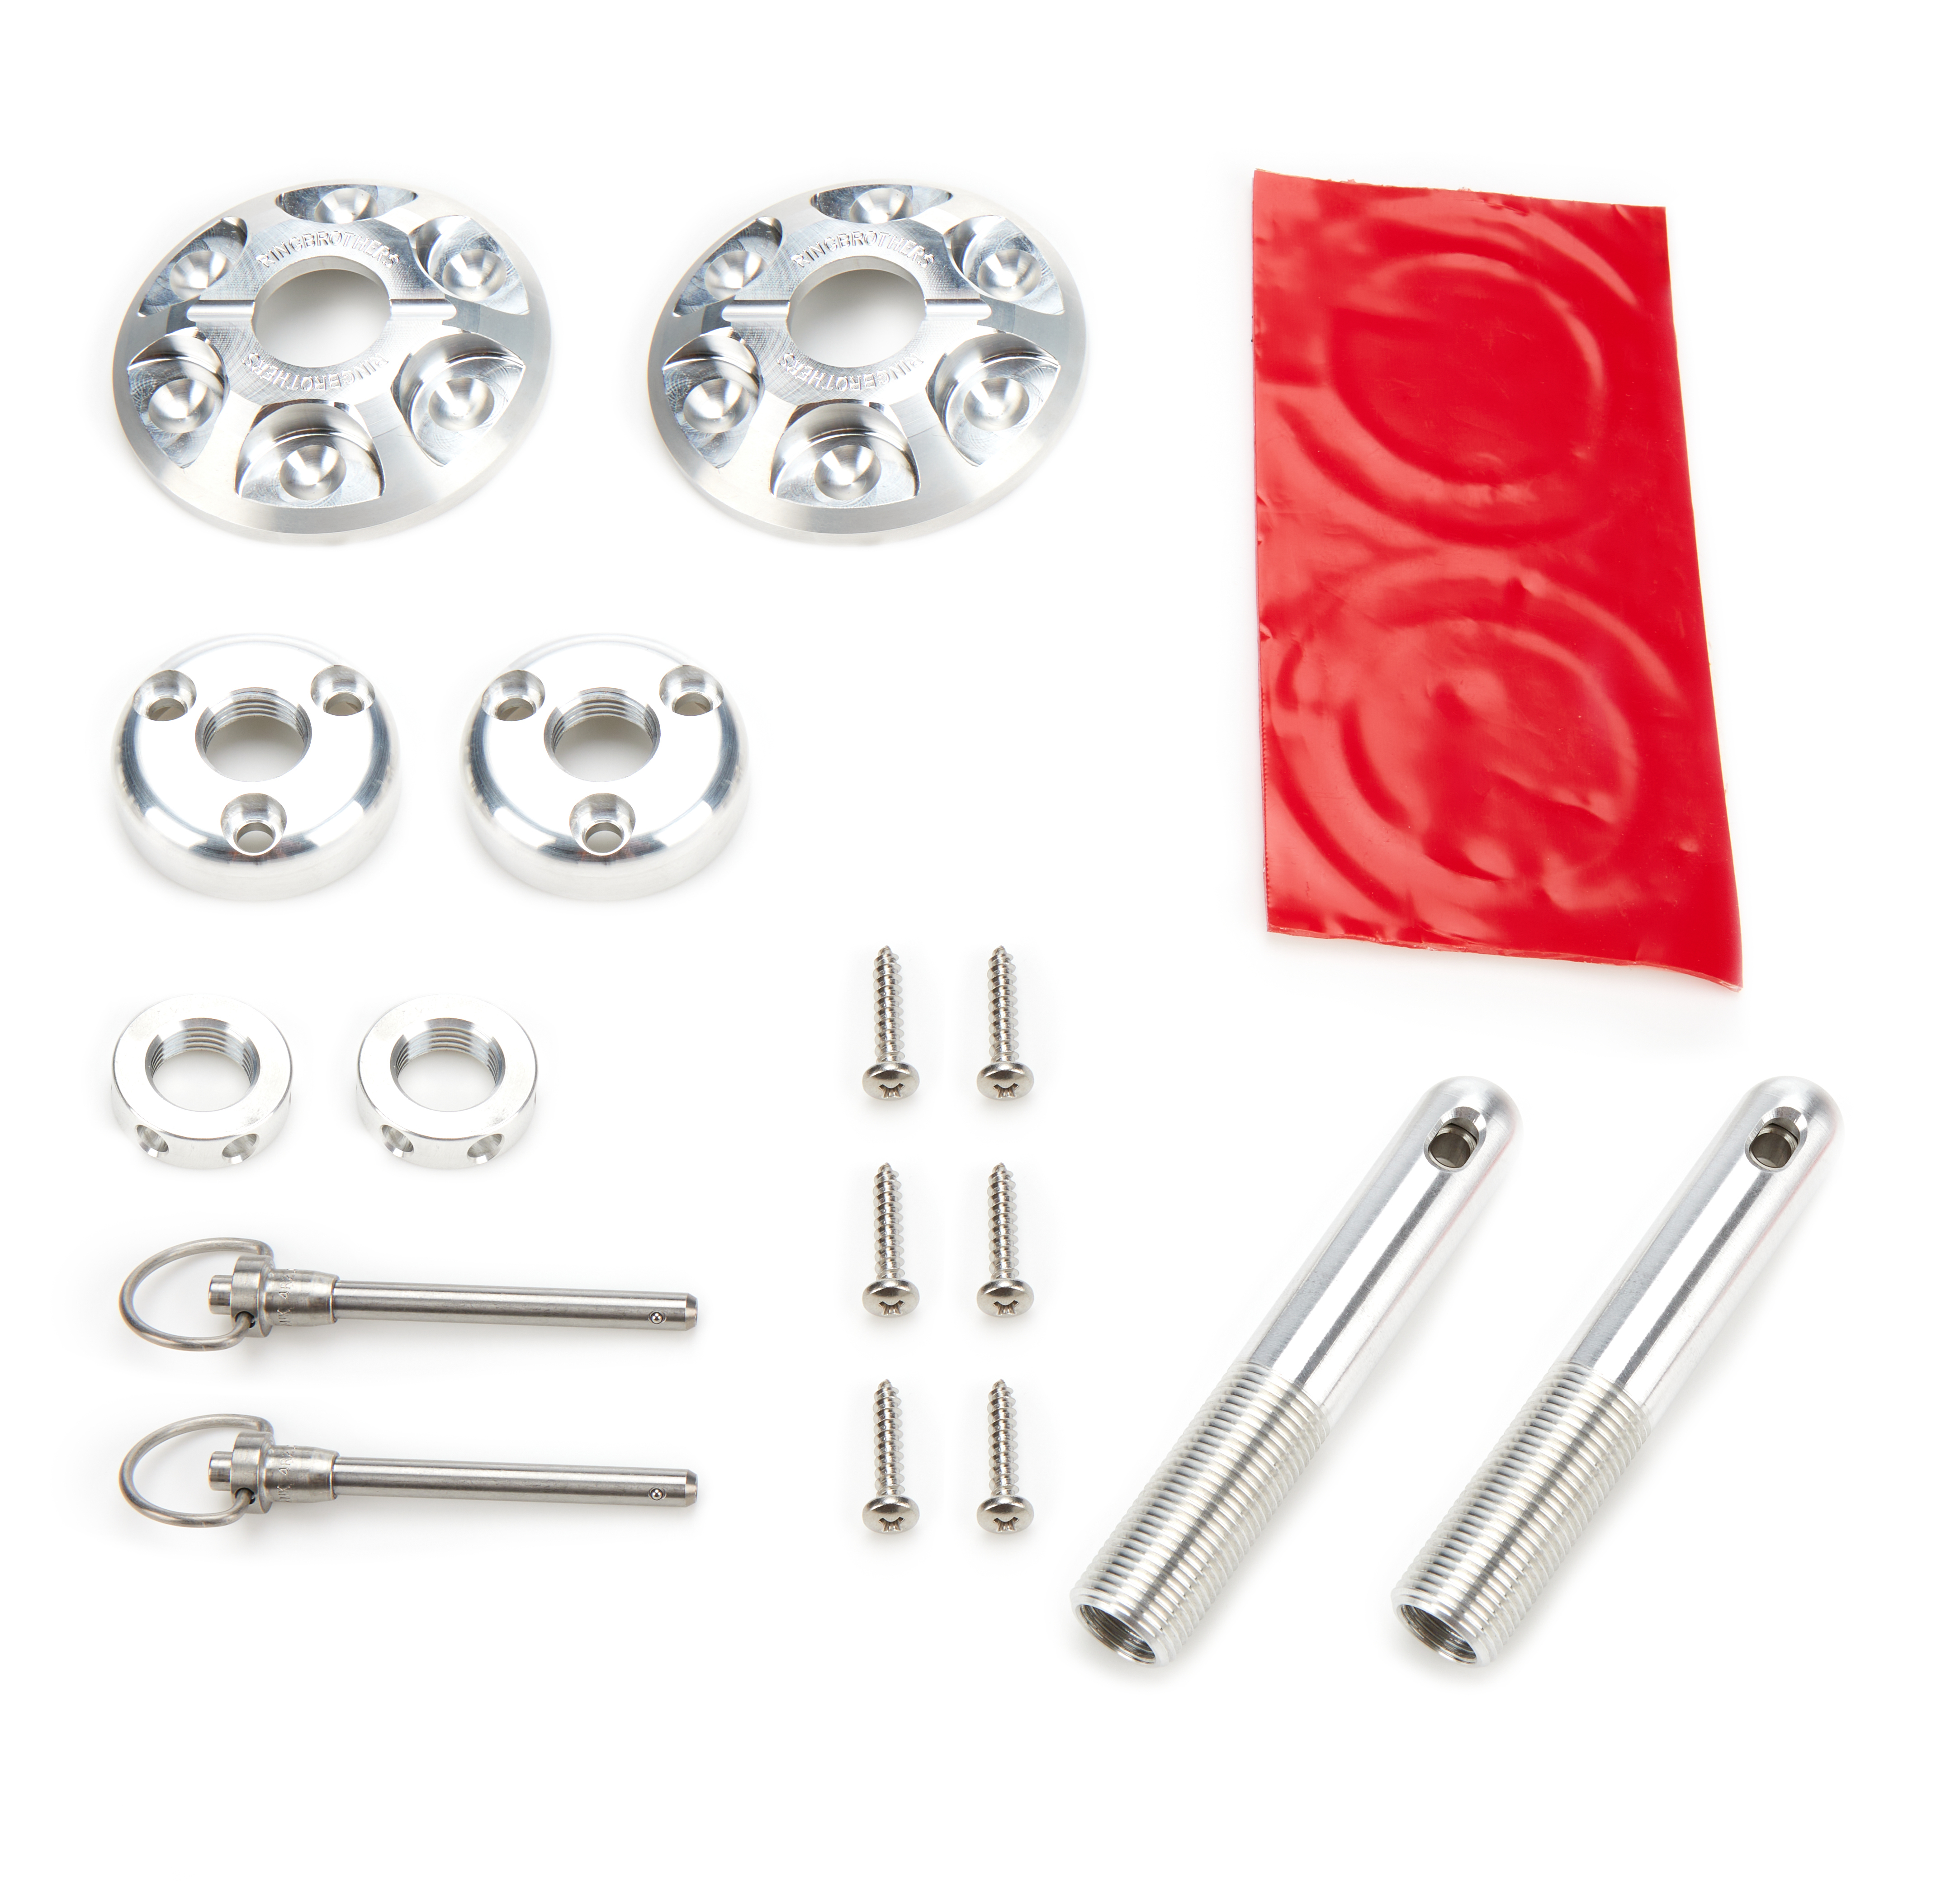 Ring Brothers 9111N Hood Pin, Round Billet Hood Pin Kit, 3/4 x 4-1/2 in Long, 3 in OD Scuff Plates, Quick Release Clips, Hardware Included, Aluminum, Natural, Universal, Kit